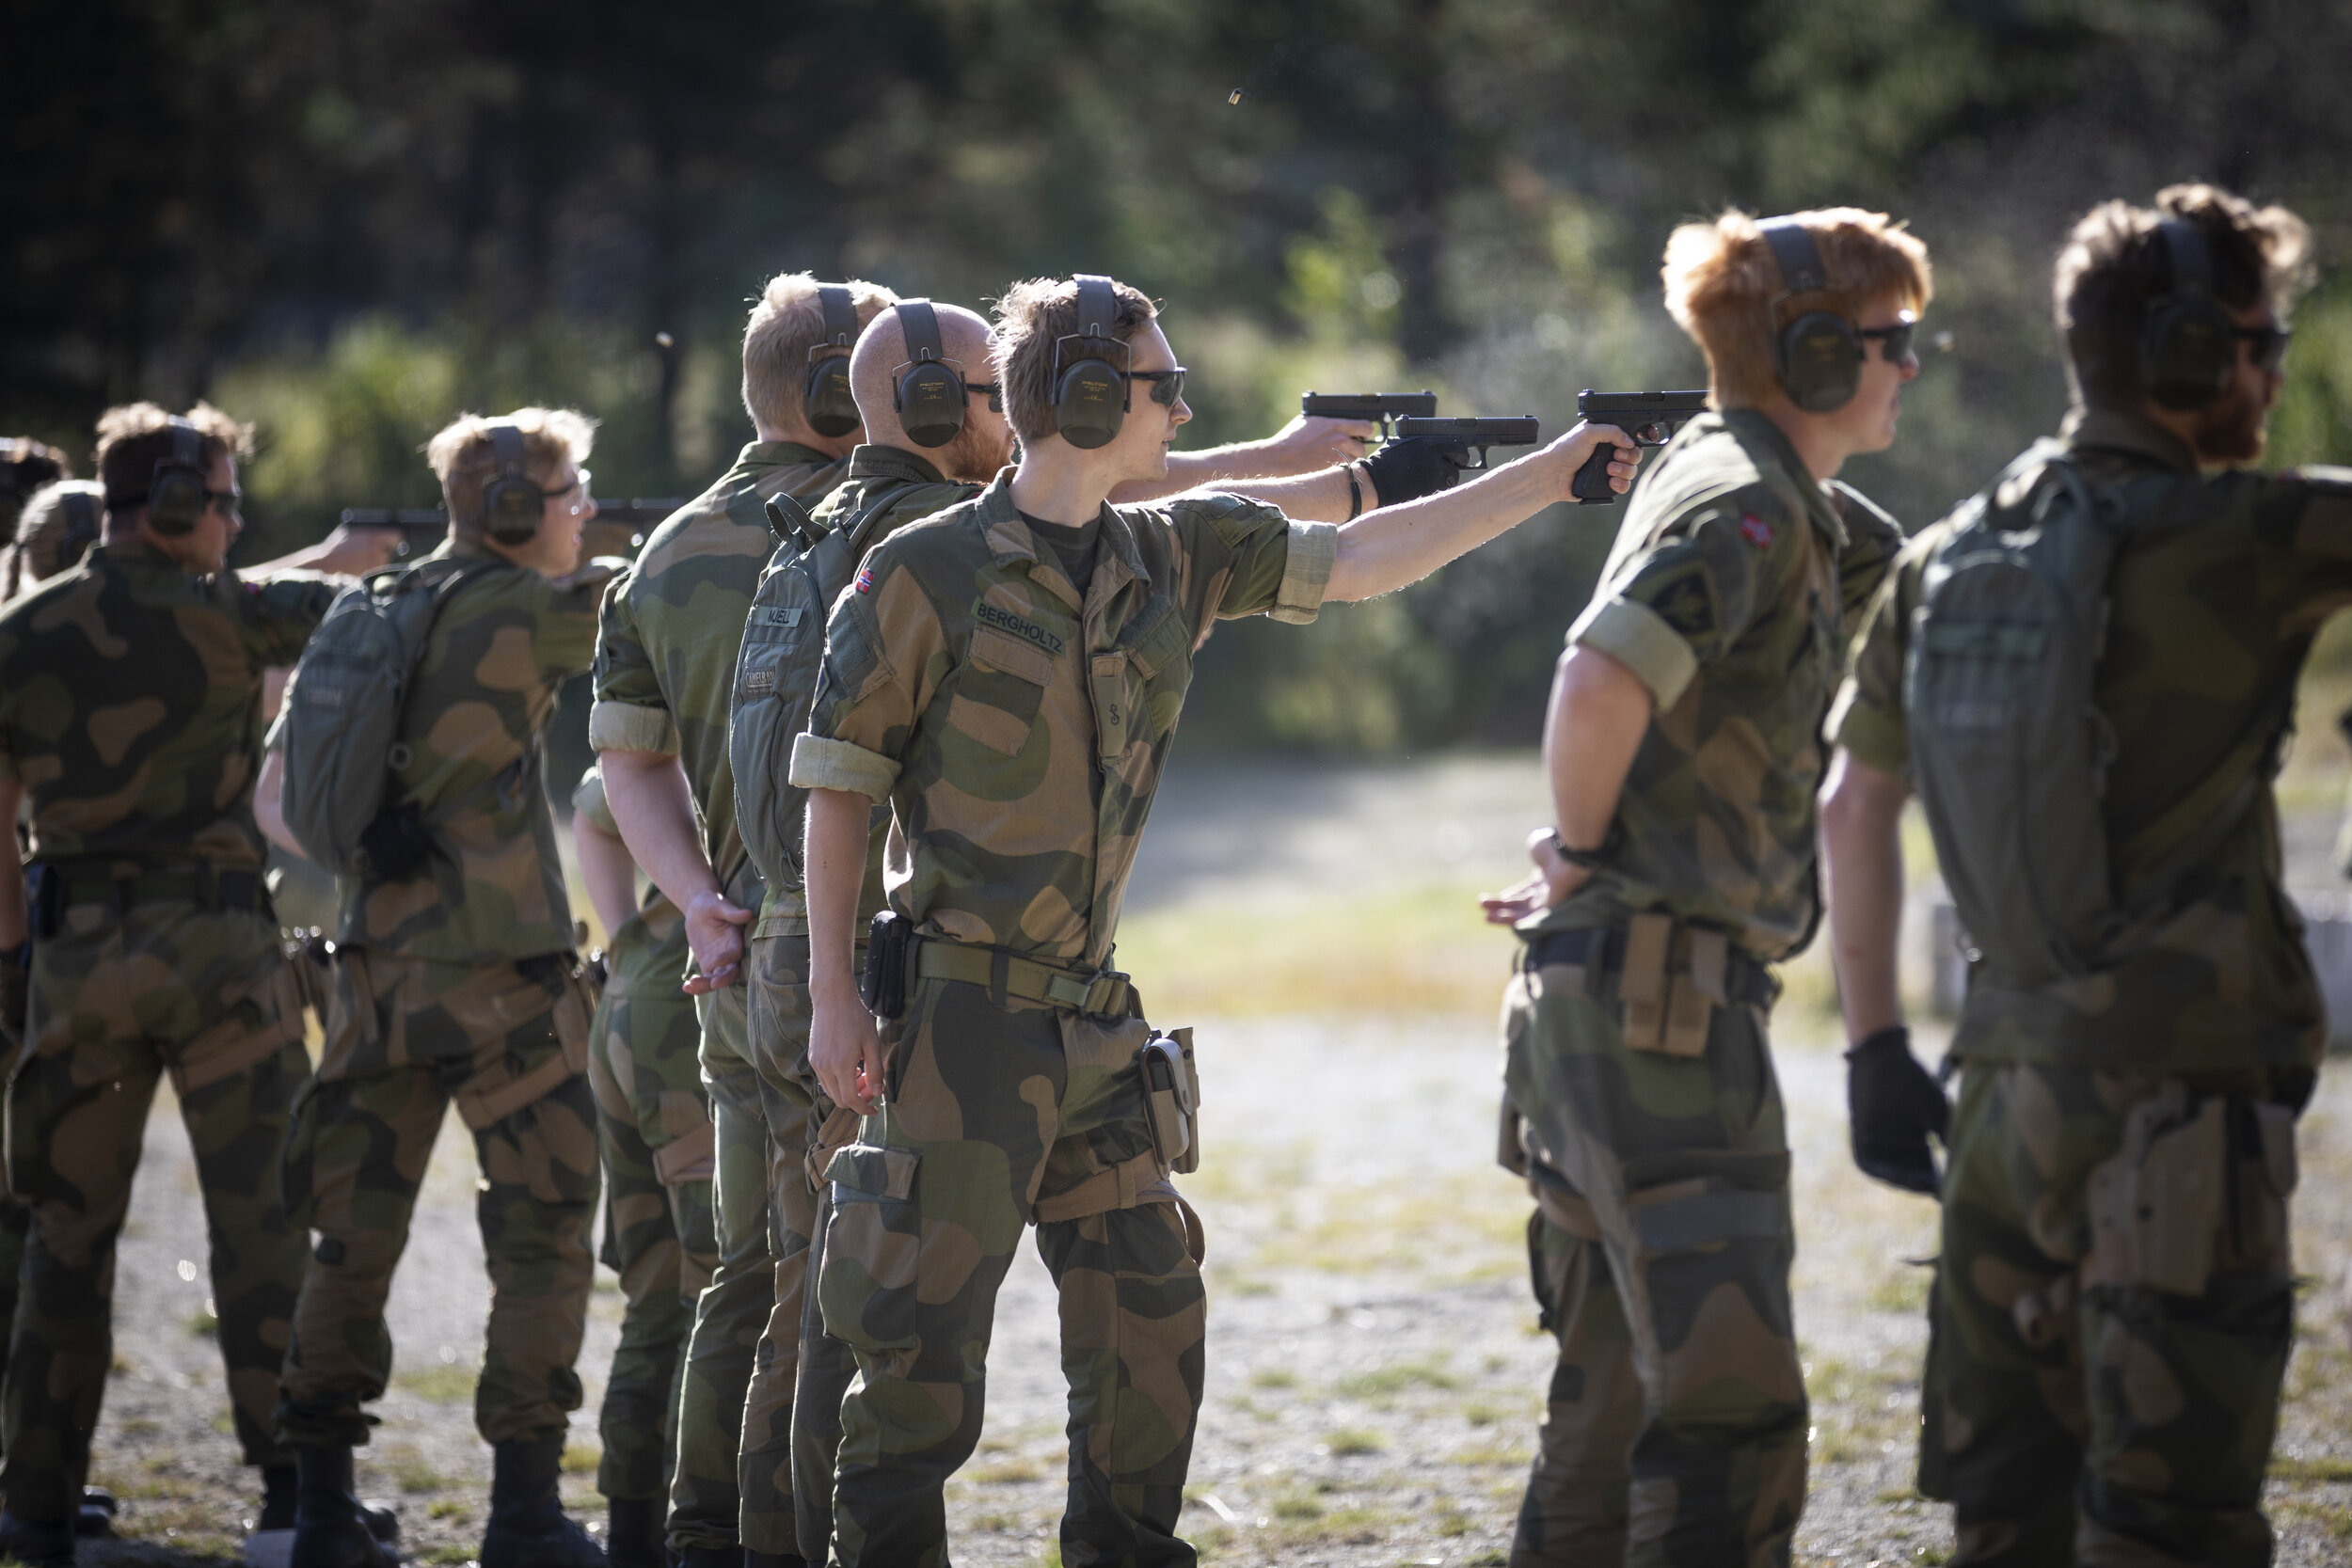  Cybersecurity students in a shooting refresher course at Dombås (Lieslia) 